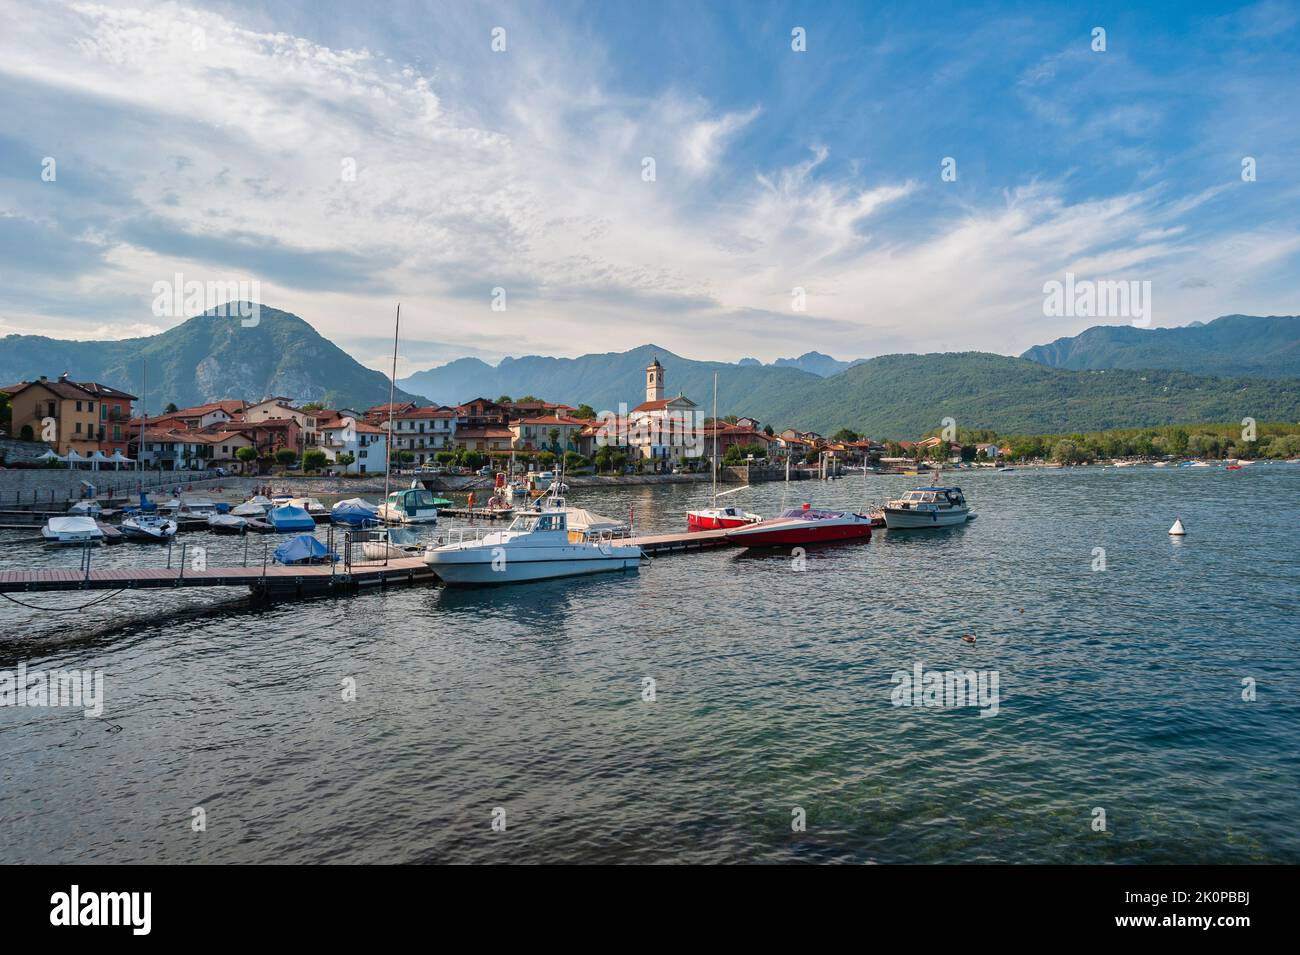 Townscape with harbor, Feriolo, Piedmont, Italy, Europe Stock Photo